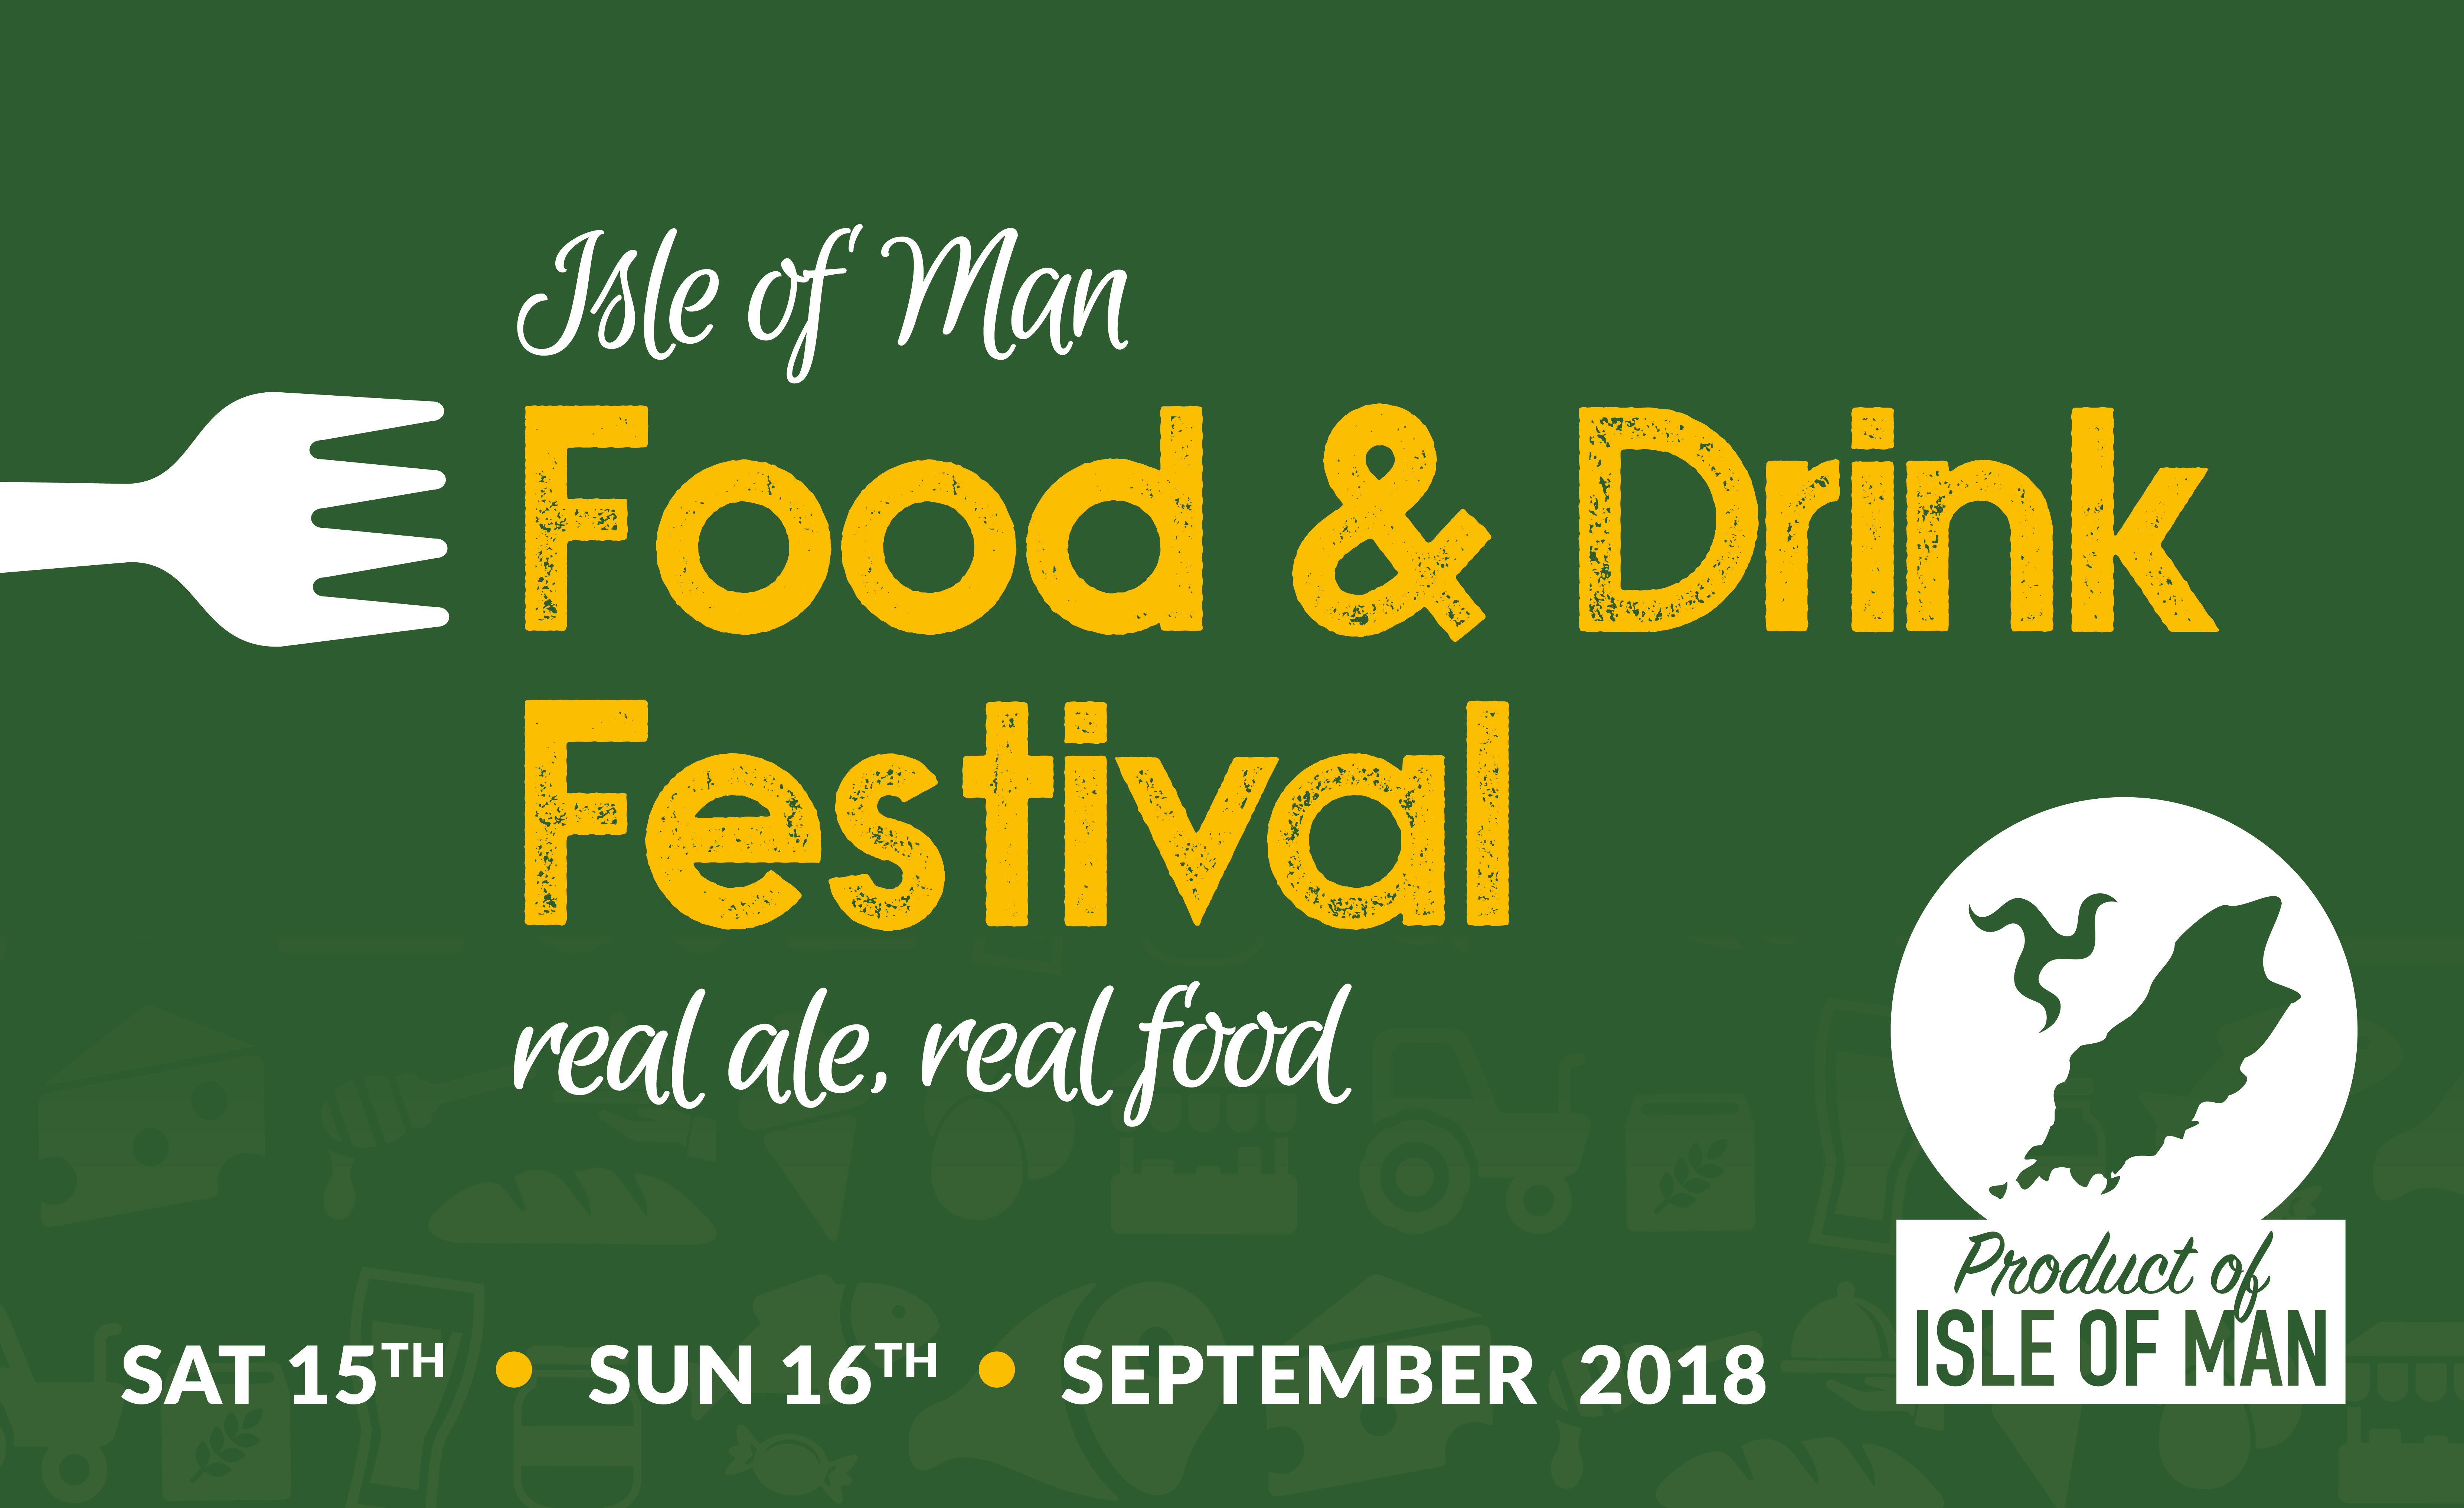 IOM Food and Drink Festival banner - 15th and 16th September 2018 - Real ale, real food